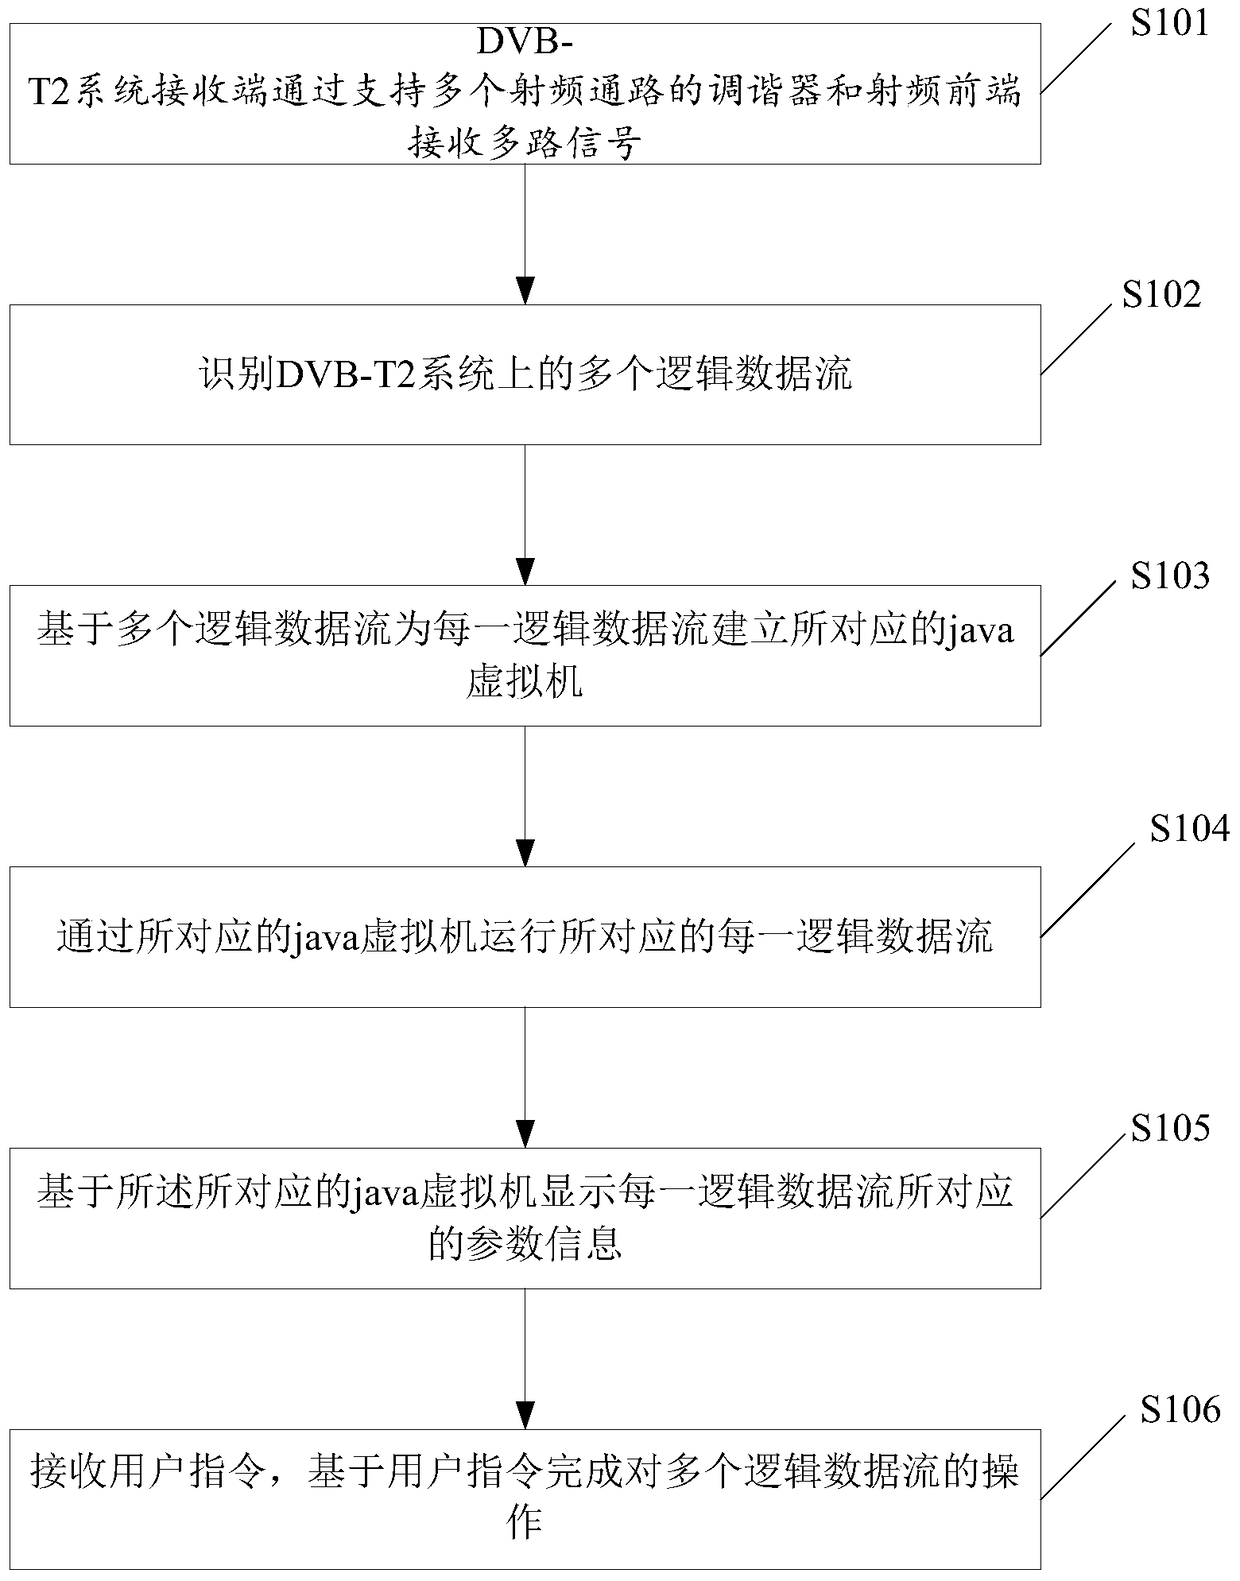 Method and system for extracting dvb-t2 stream information through virtual machine